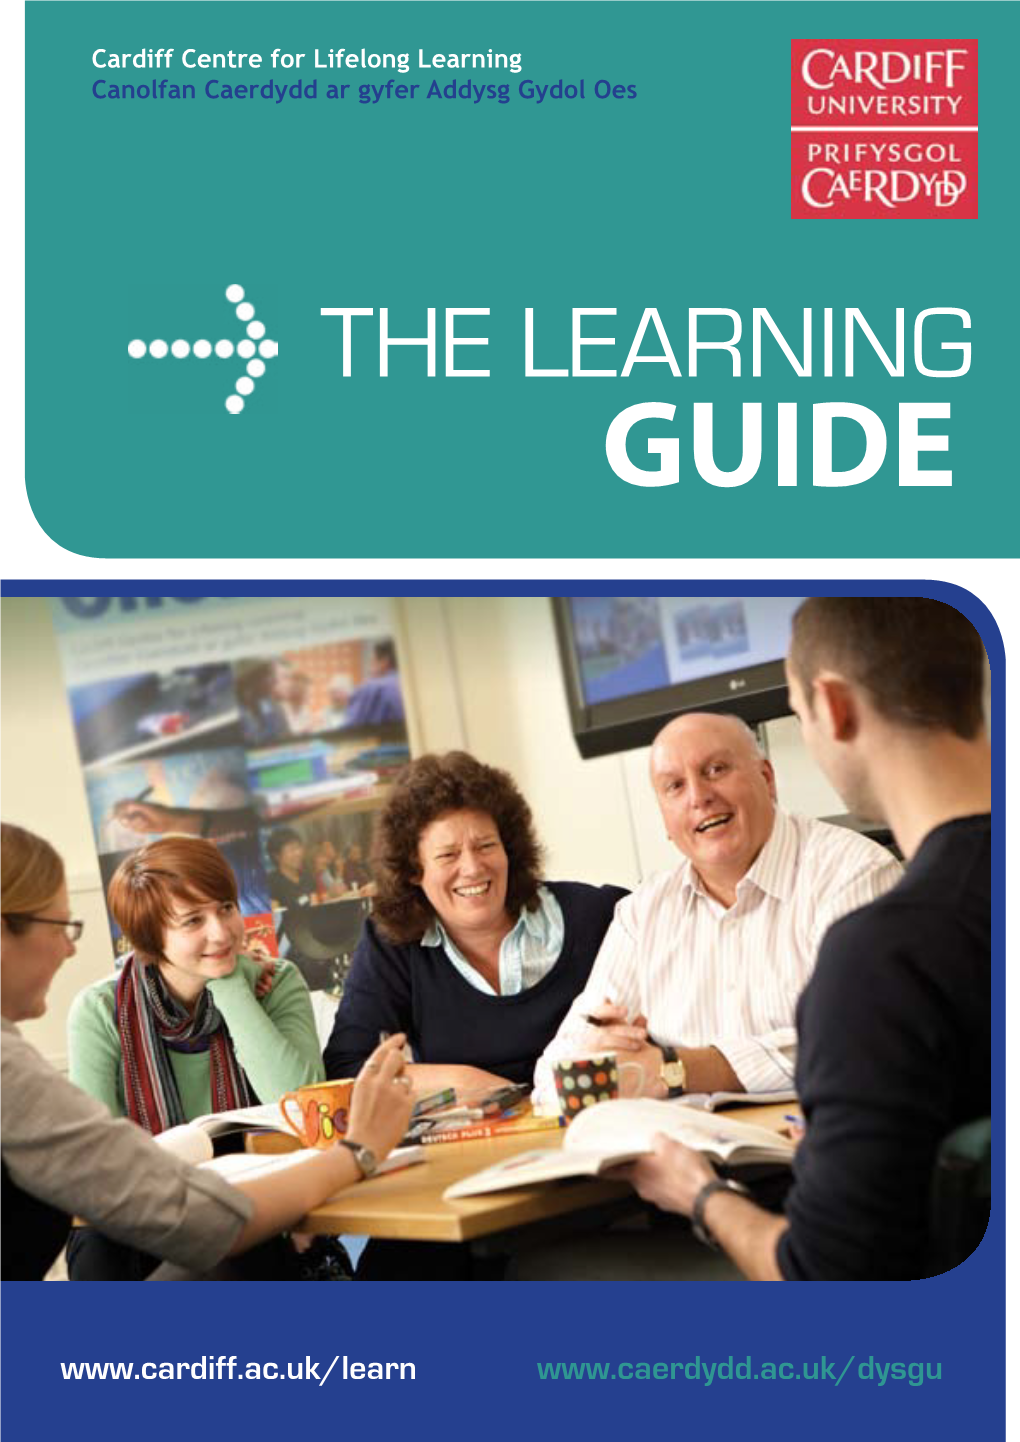 The Learning Guide